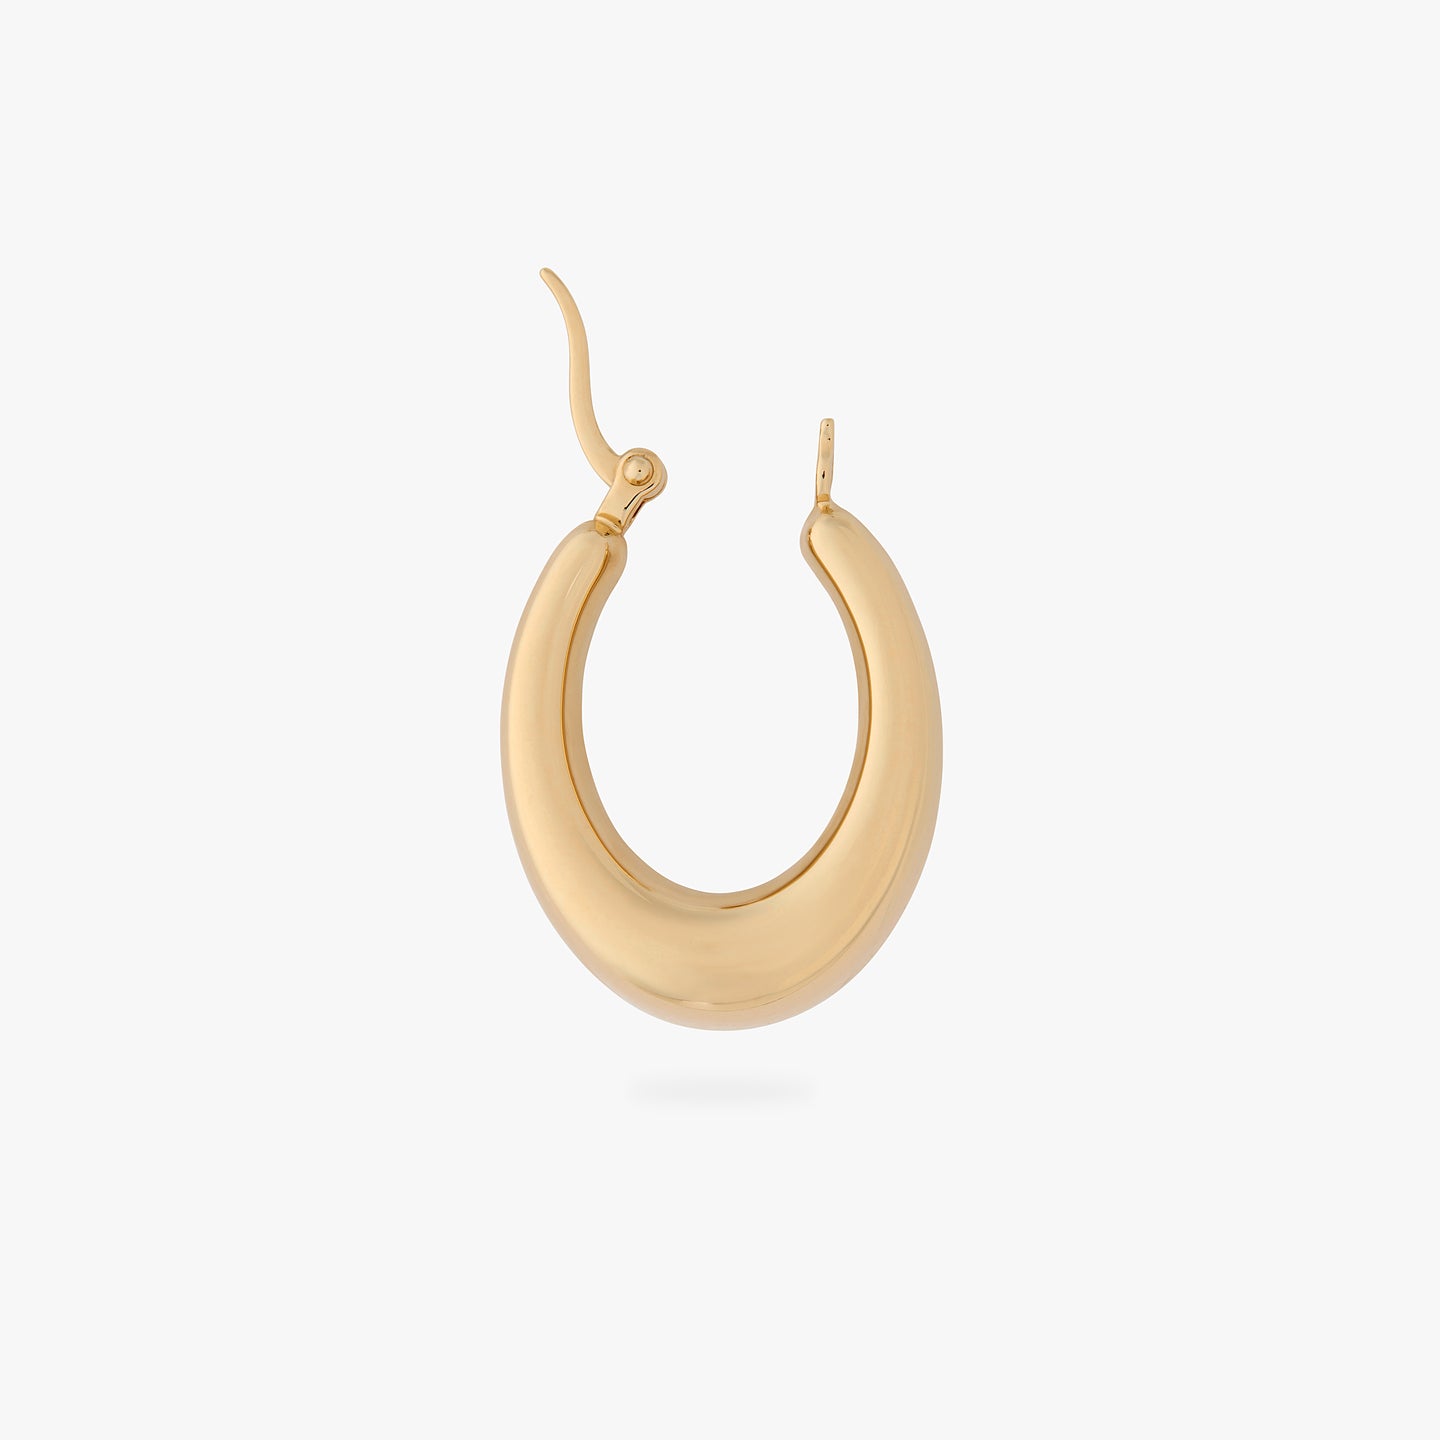 an oval shaped hoop earring in gold unhinged color:null|gold